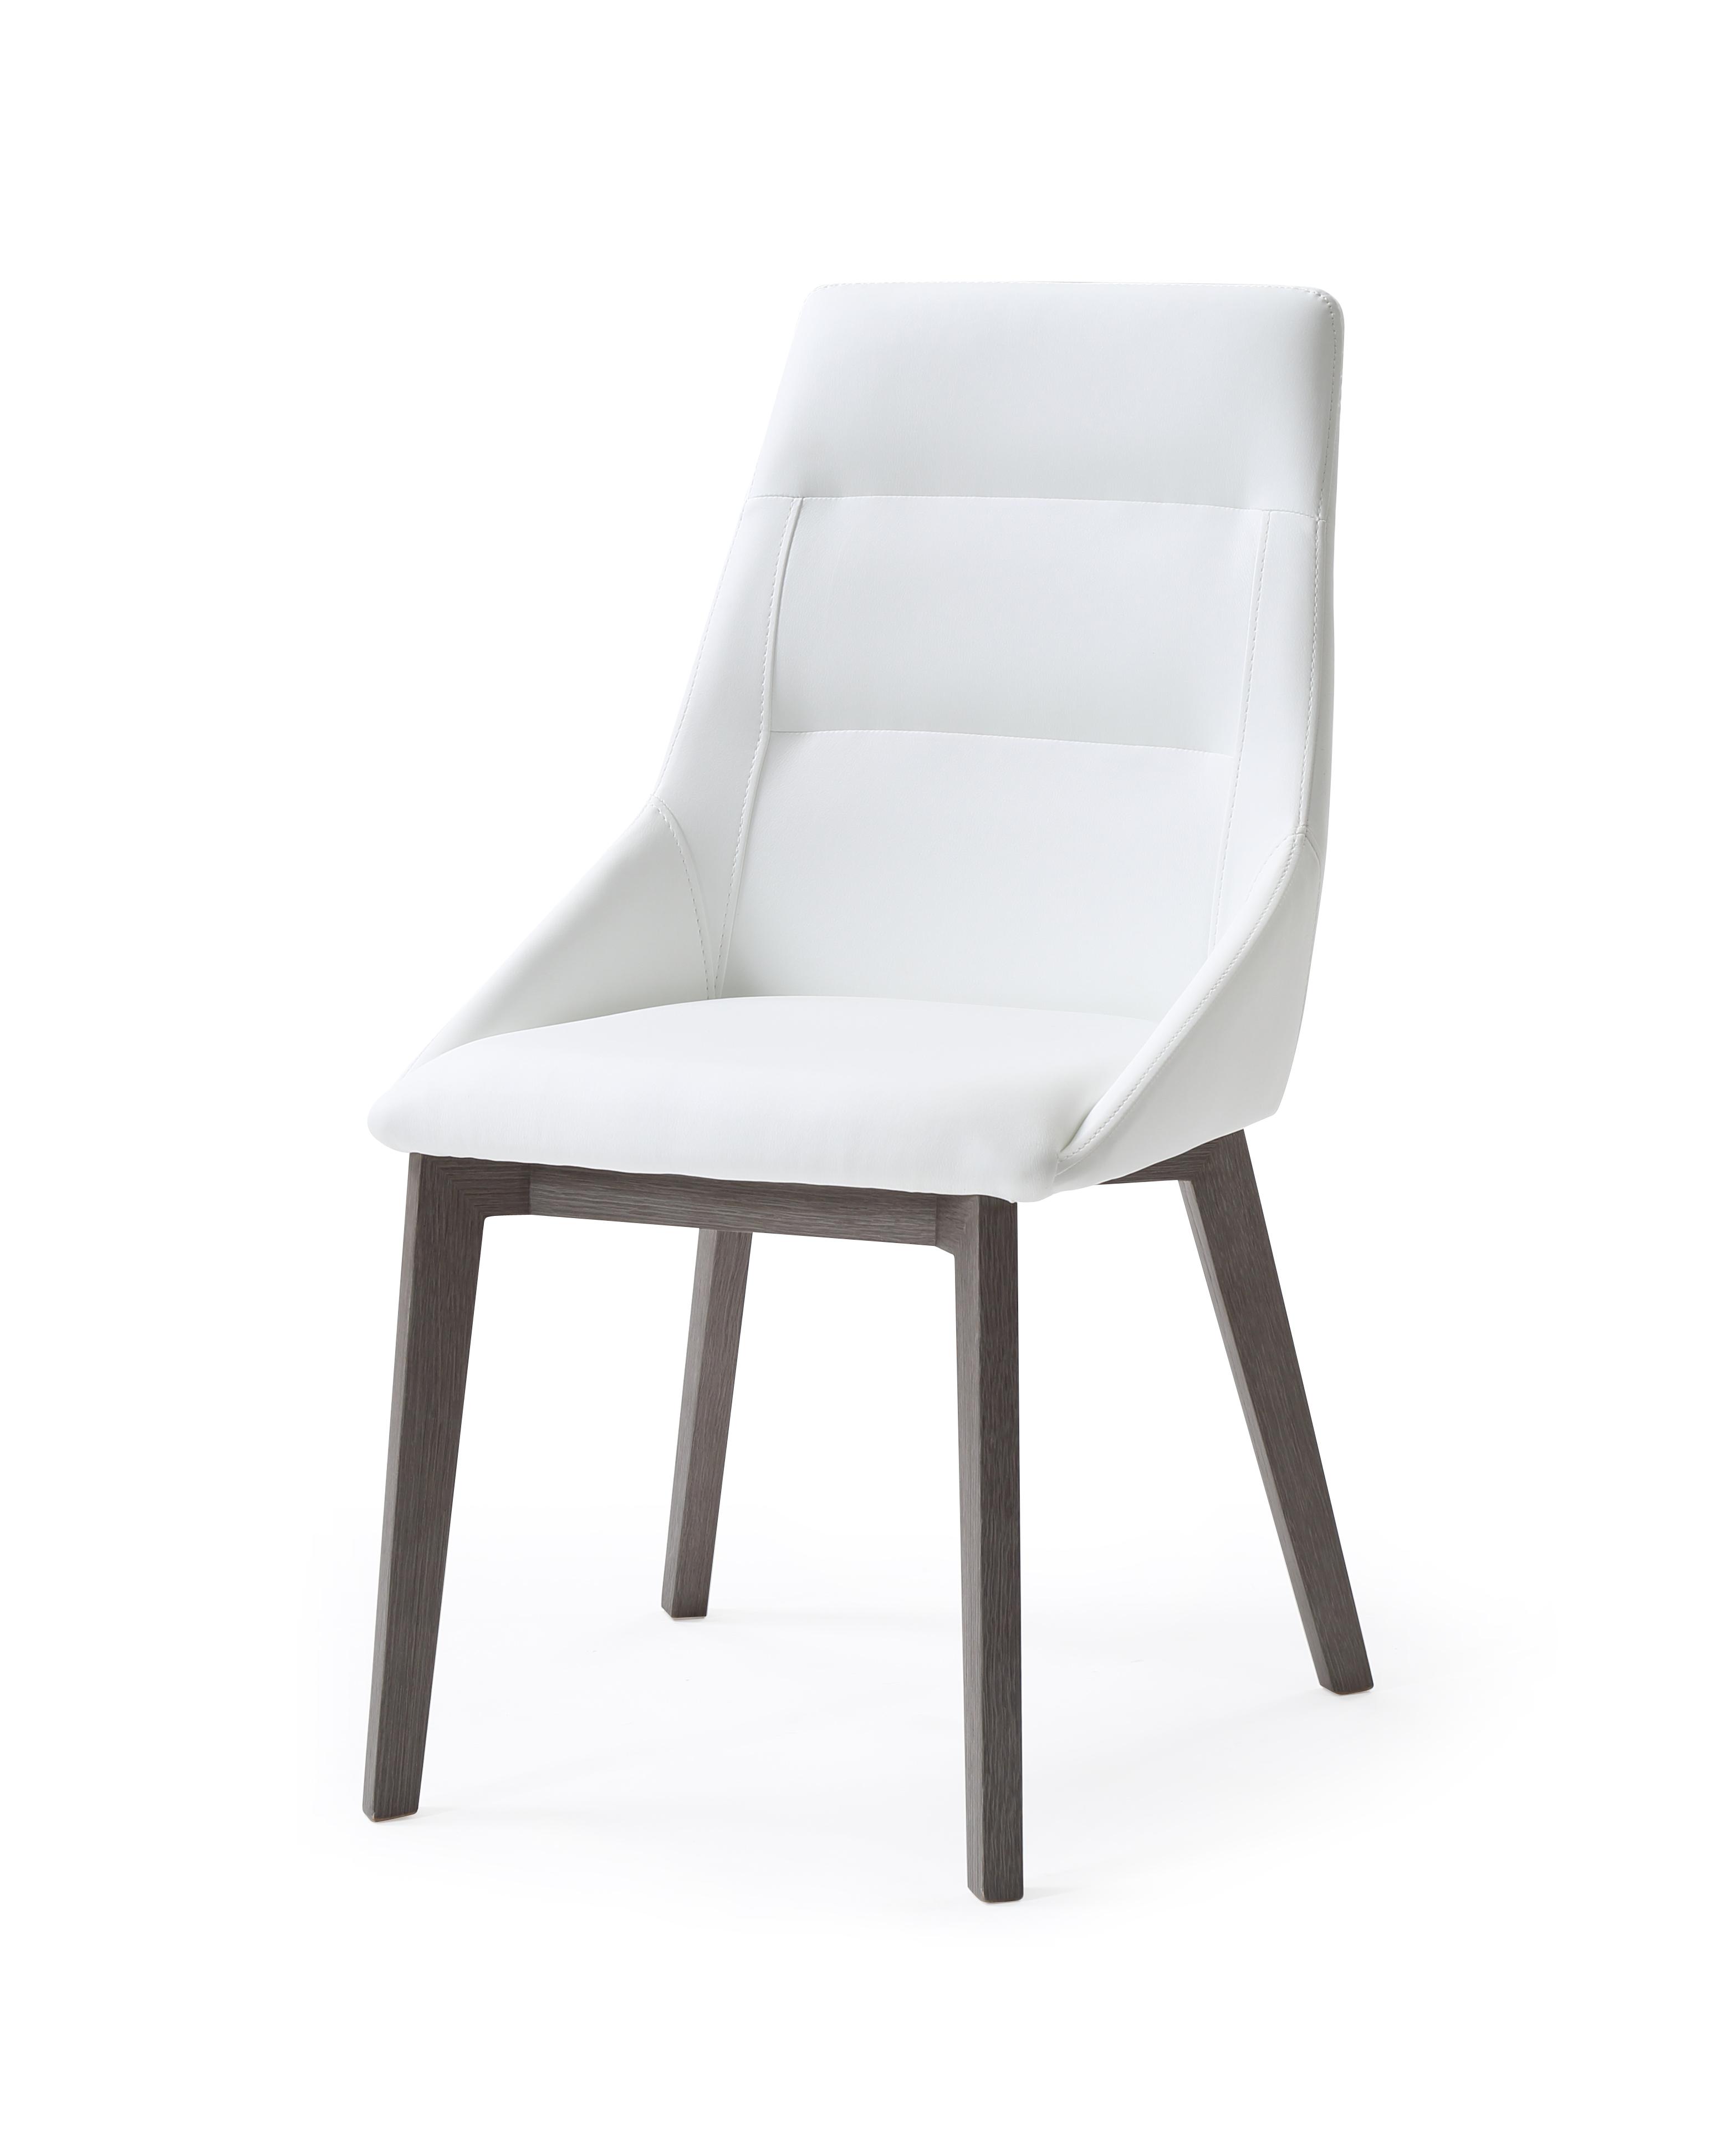 Modern Dining Chair Set DC1420-GRY/WHT Siena DC1420-GRY/WHT in White Faux Leather